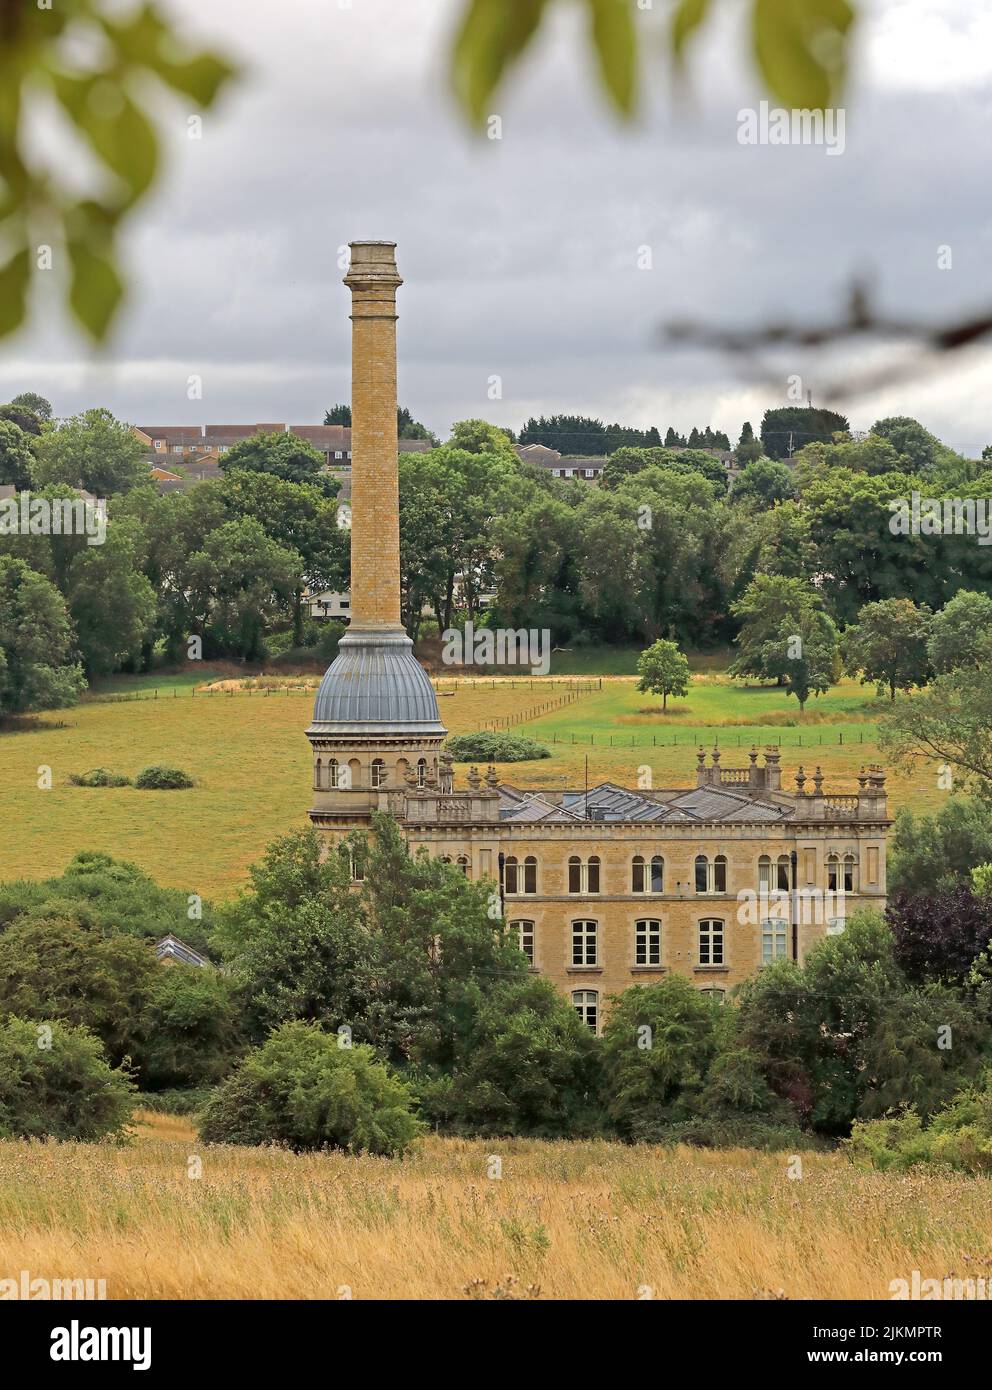 Bliss Tweed Mill, Chipping Norton, Cotswolds, Gloucestershire, Angleterre, ROYAUME-UNI Banque D'Images